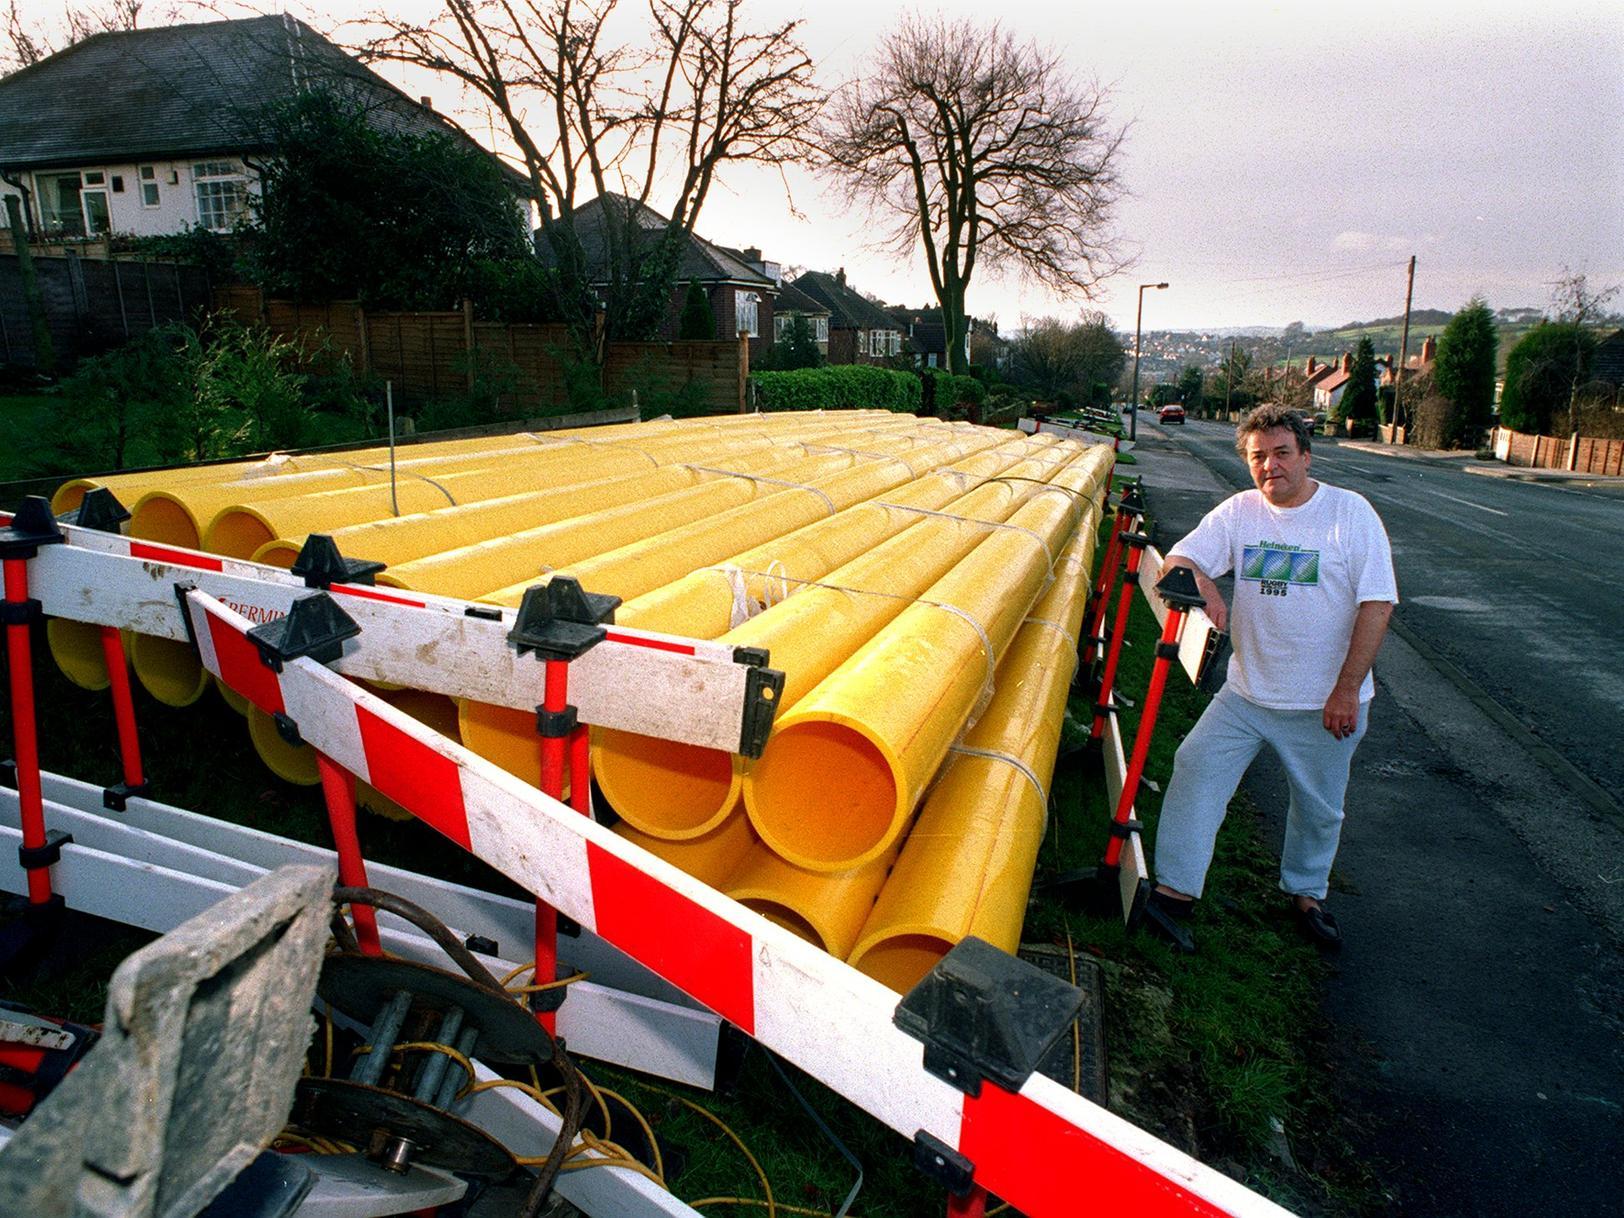 This is Rod Stanyon who was raging after these pipes were left outside his home in Tinshill.